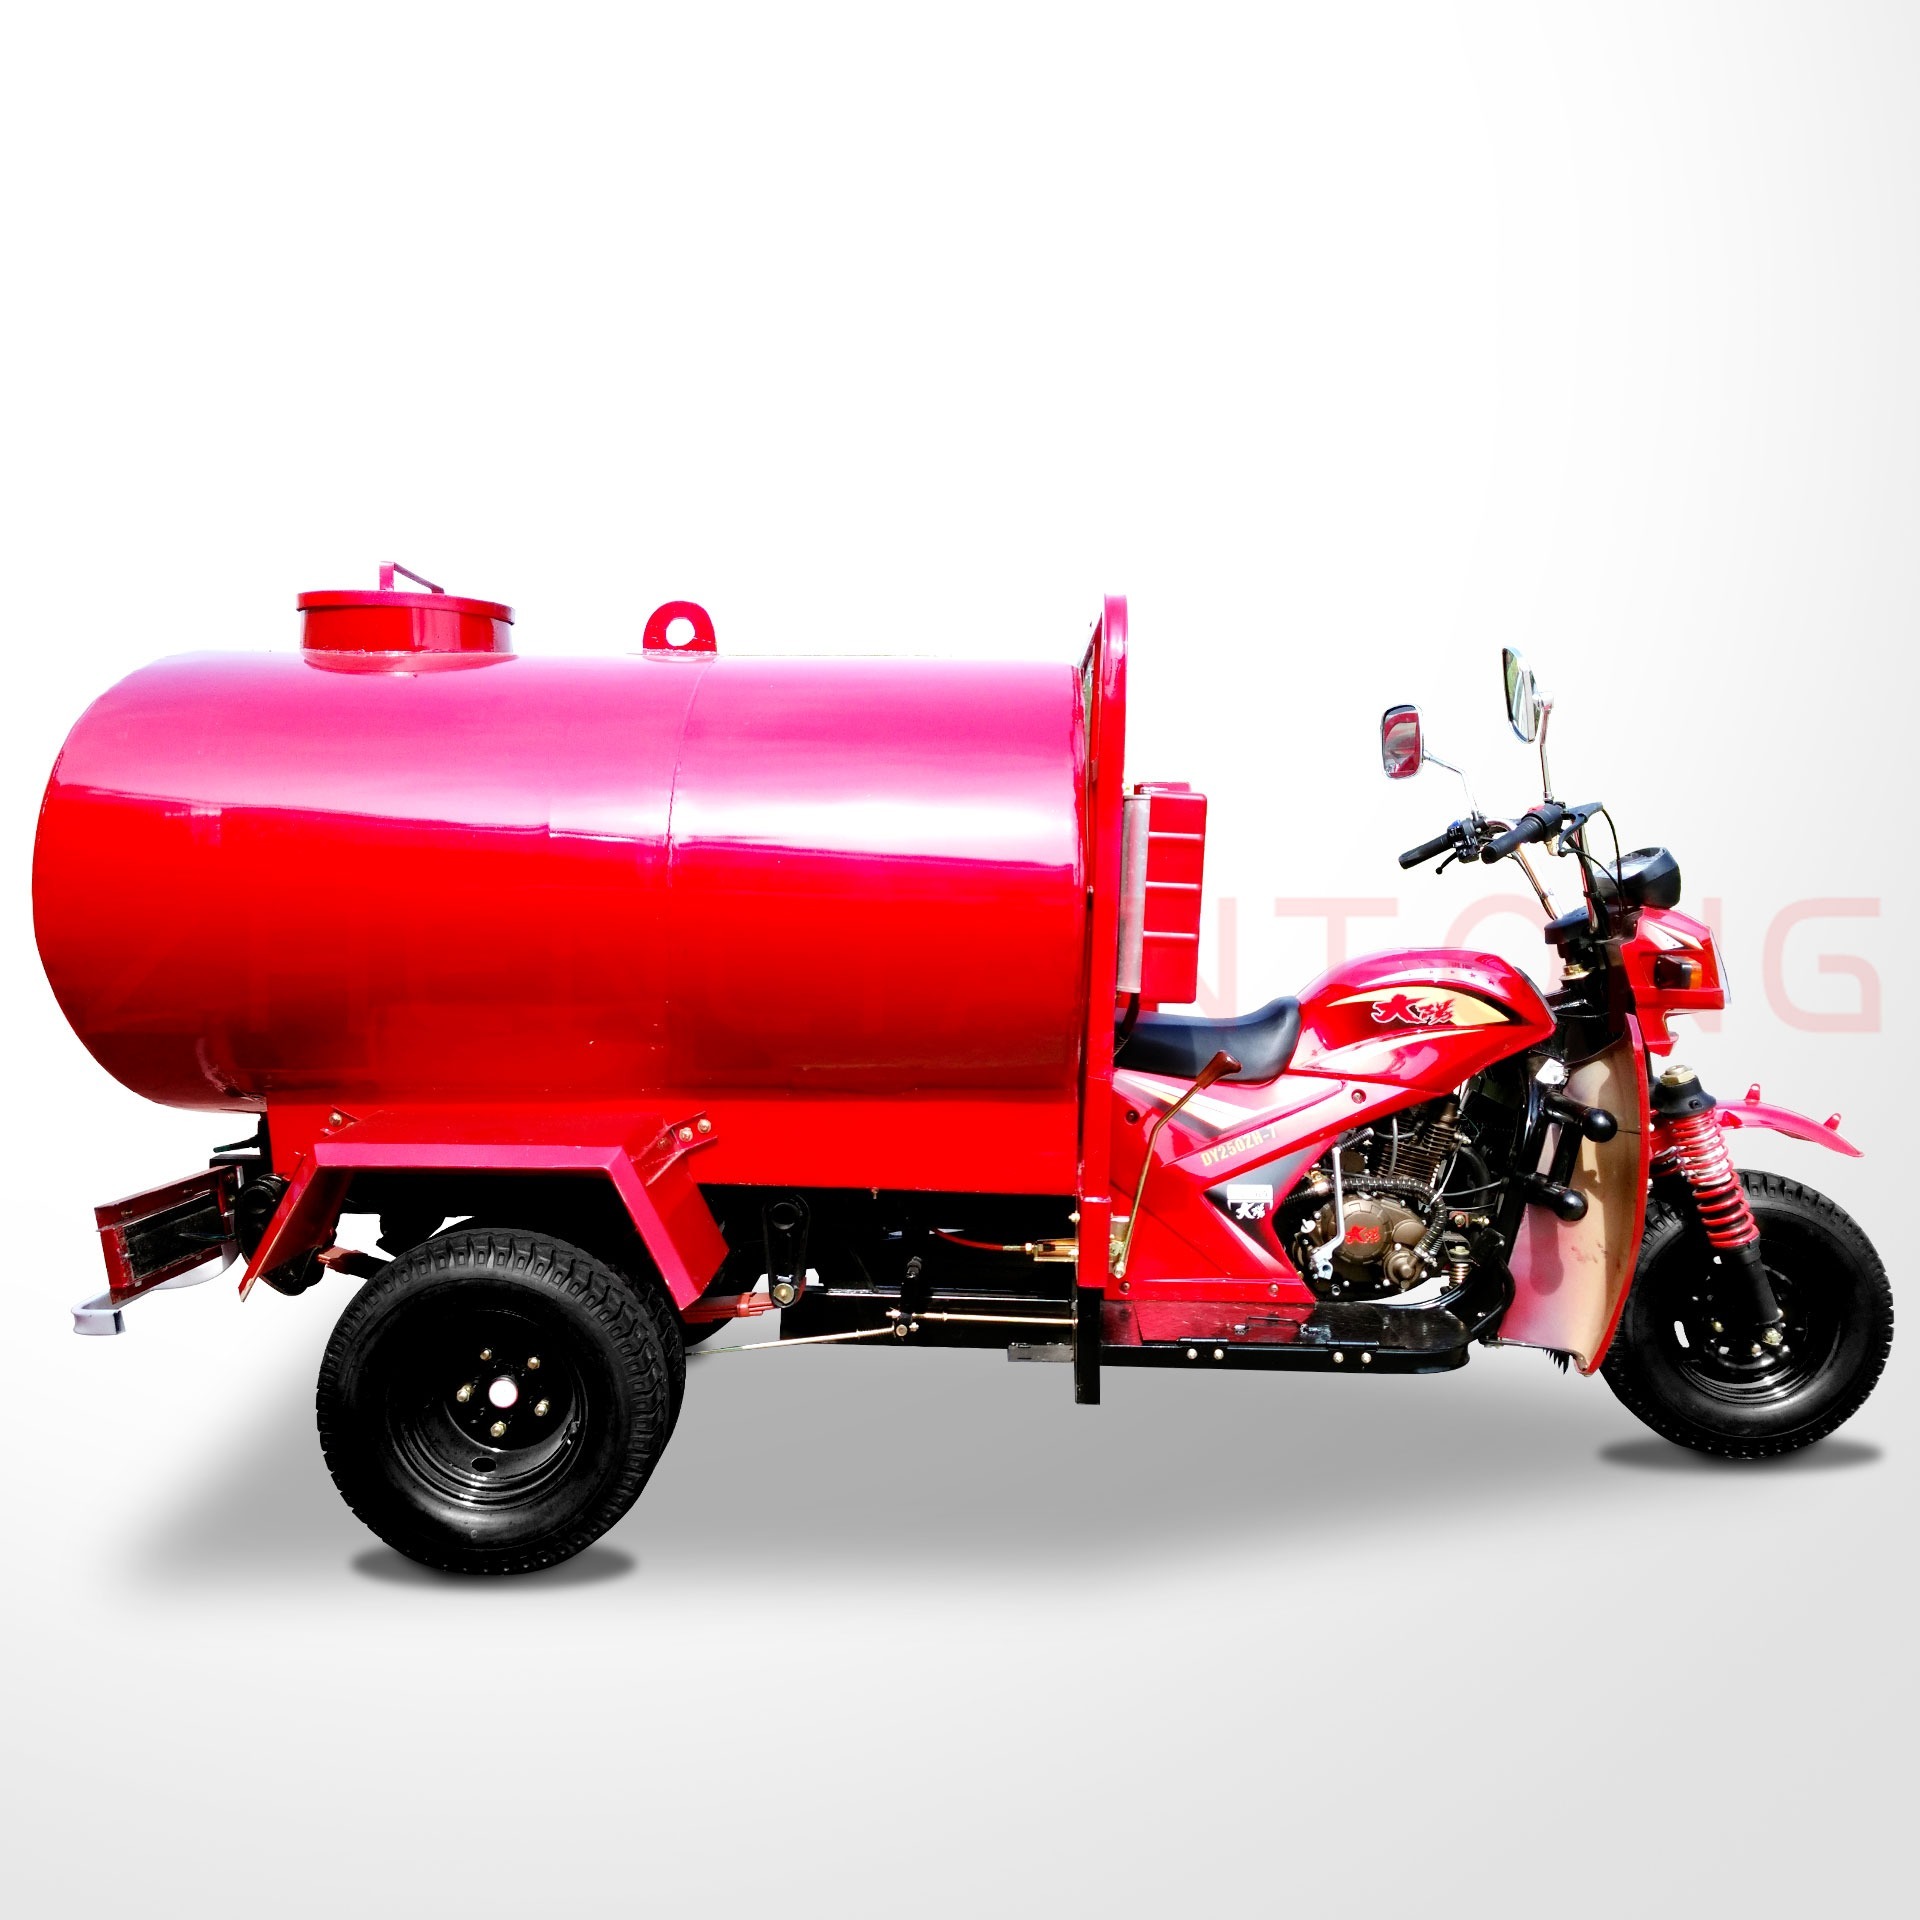 2016 new designed top selling made in china standard water tanker/oil tanker tricycle/gas/fue tank tuk pedicab for sale in Egypt